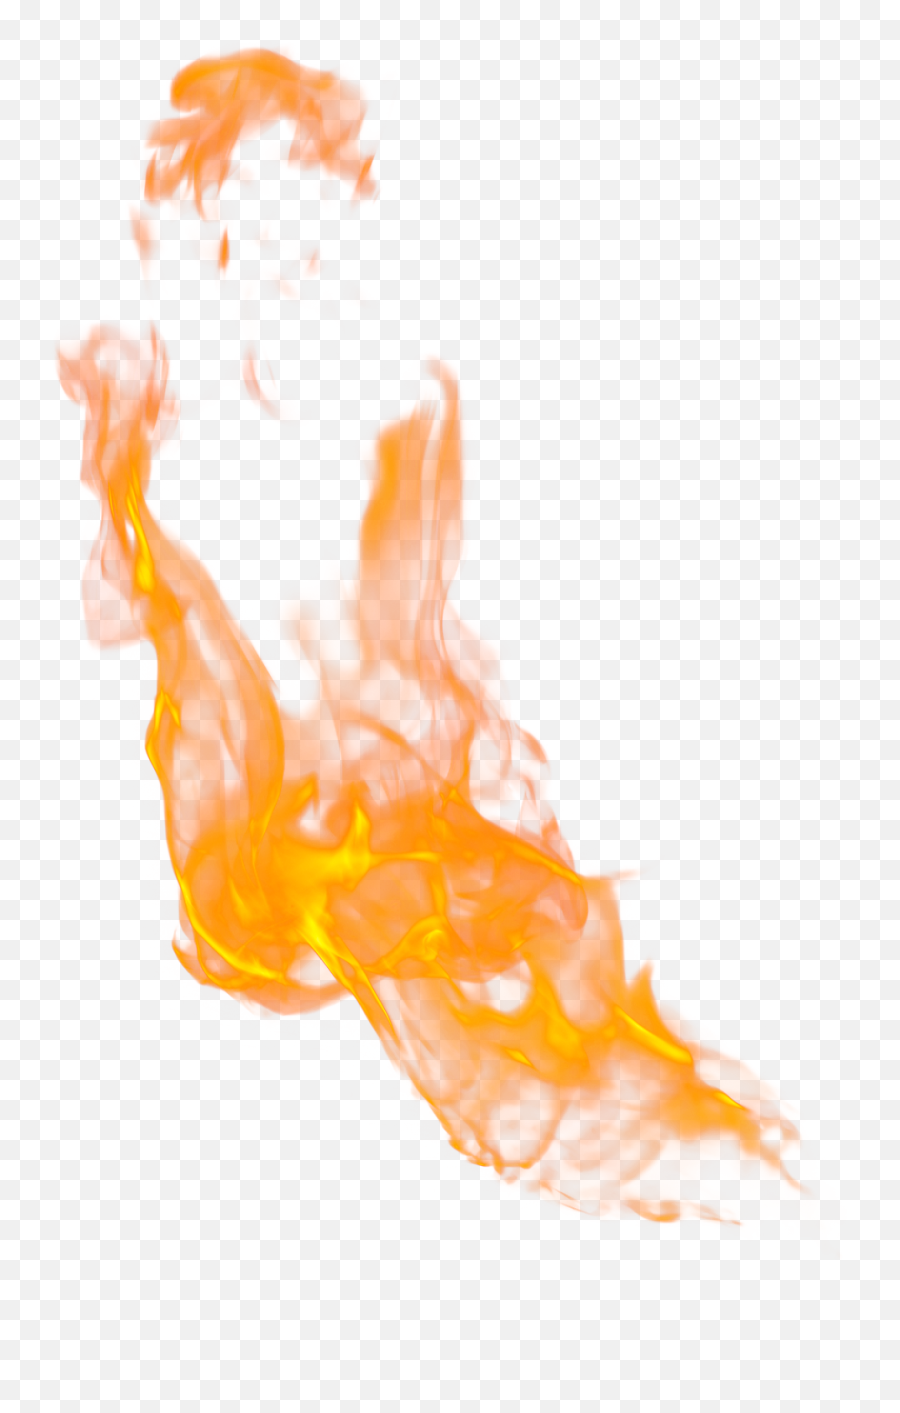 Fire Flame Png Image For Free Download Emoji,Flame Png Transparent